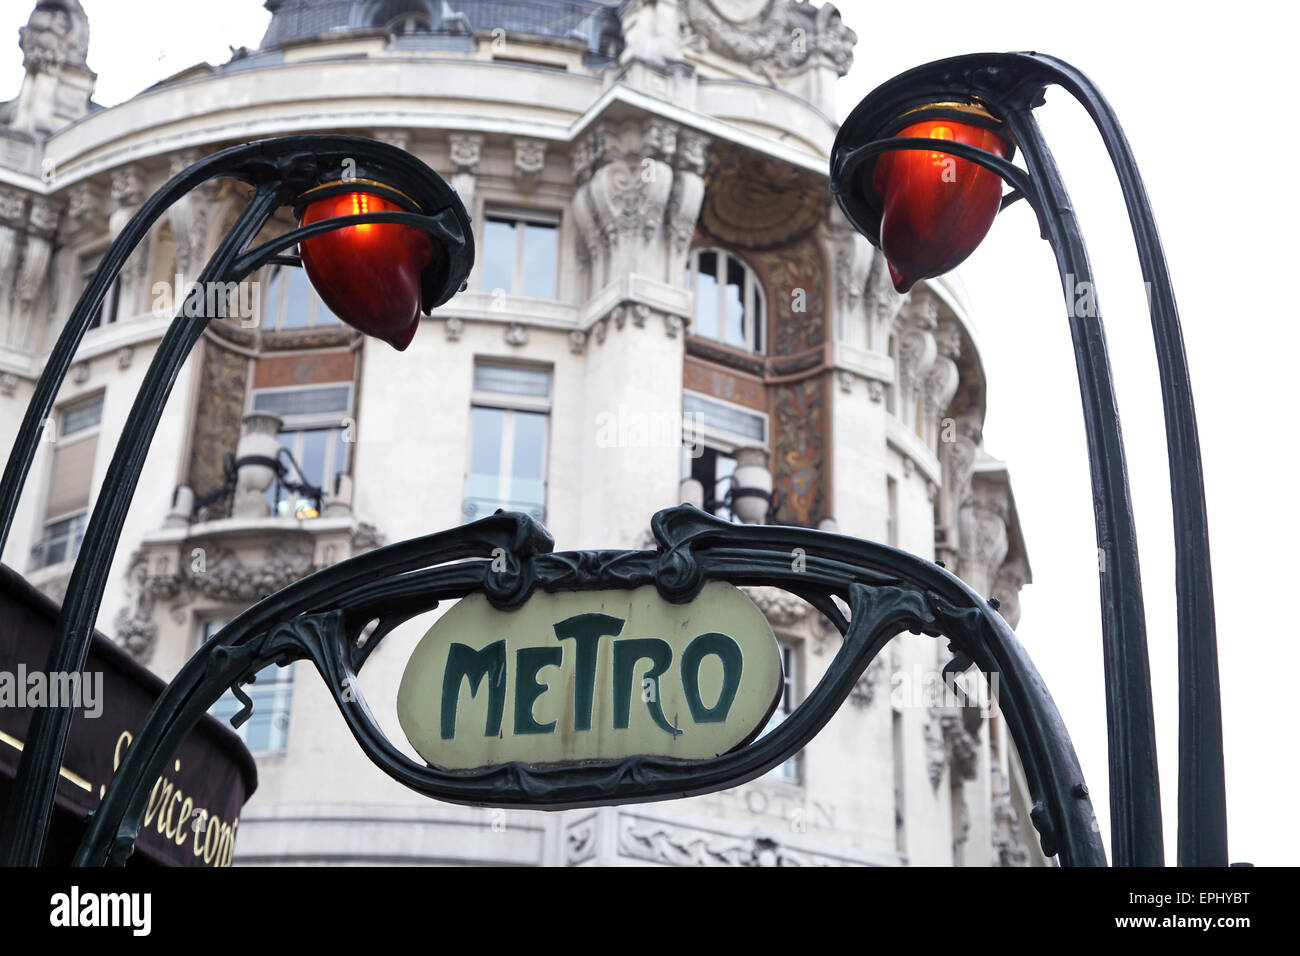 Metro sign by french architect Hector Guimard.Art Nouveau design.Entrance to a metro station in Paris France Stock Photo